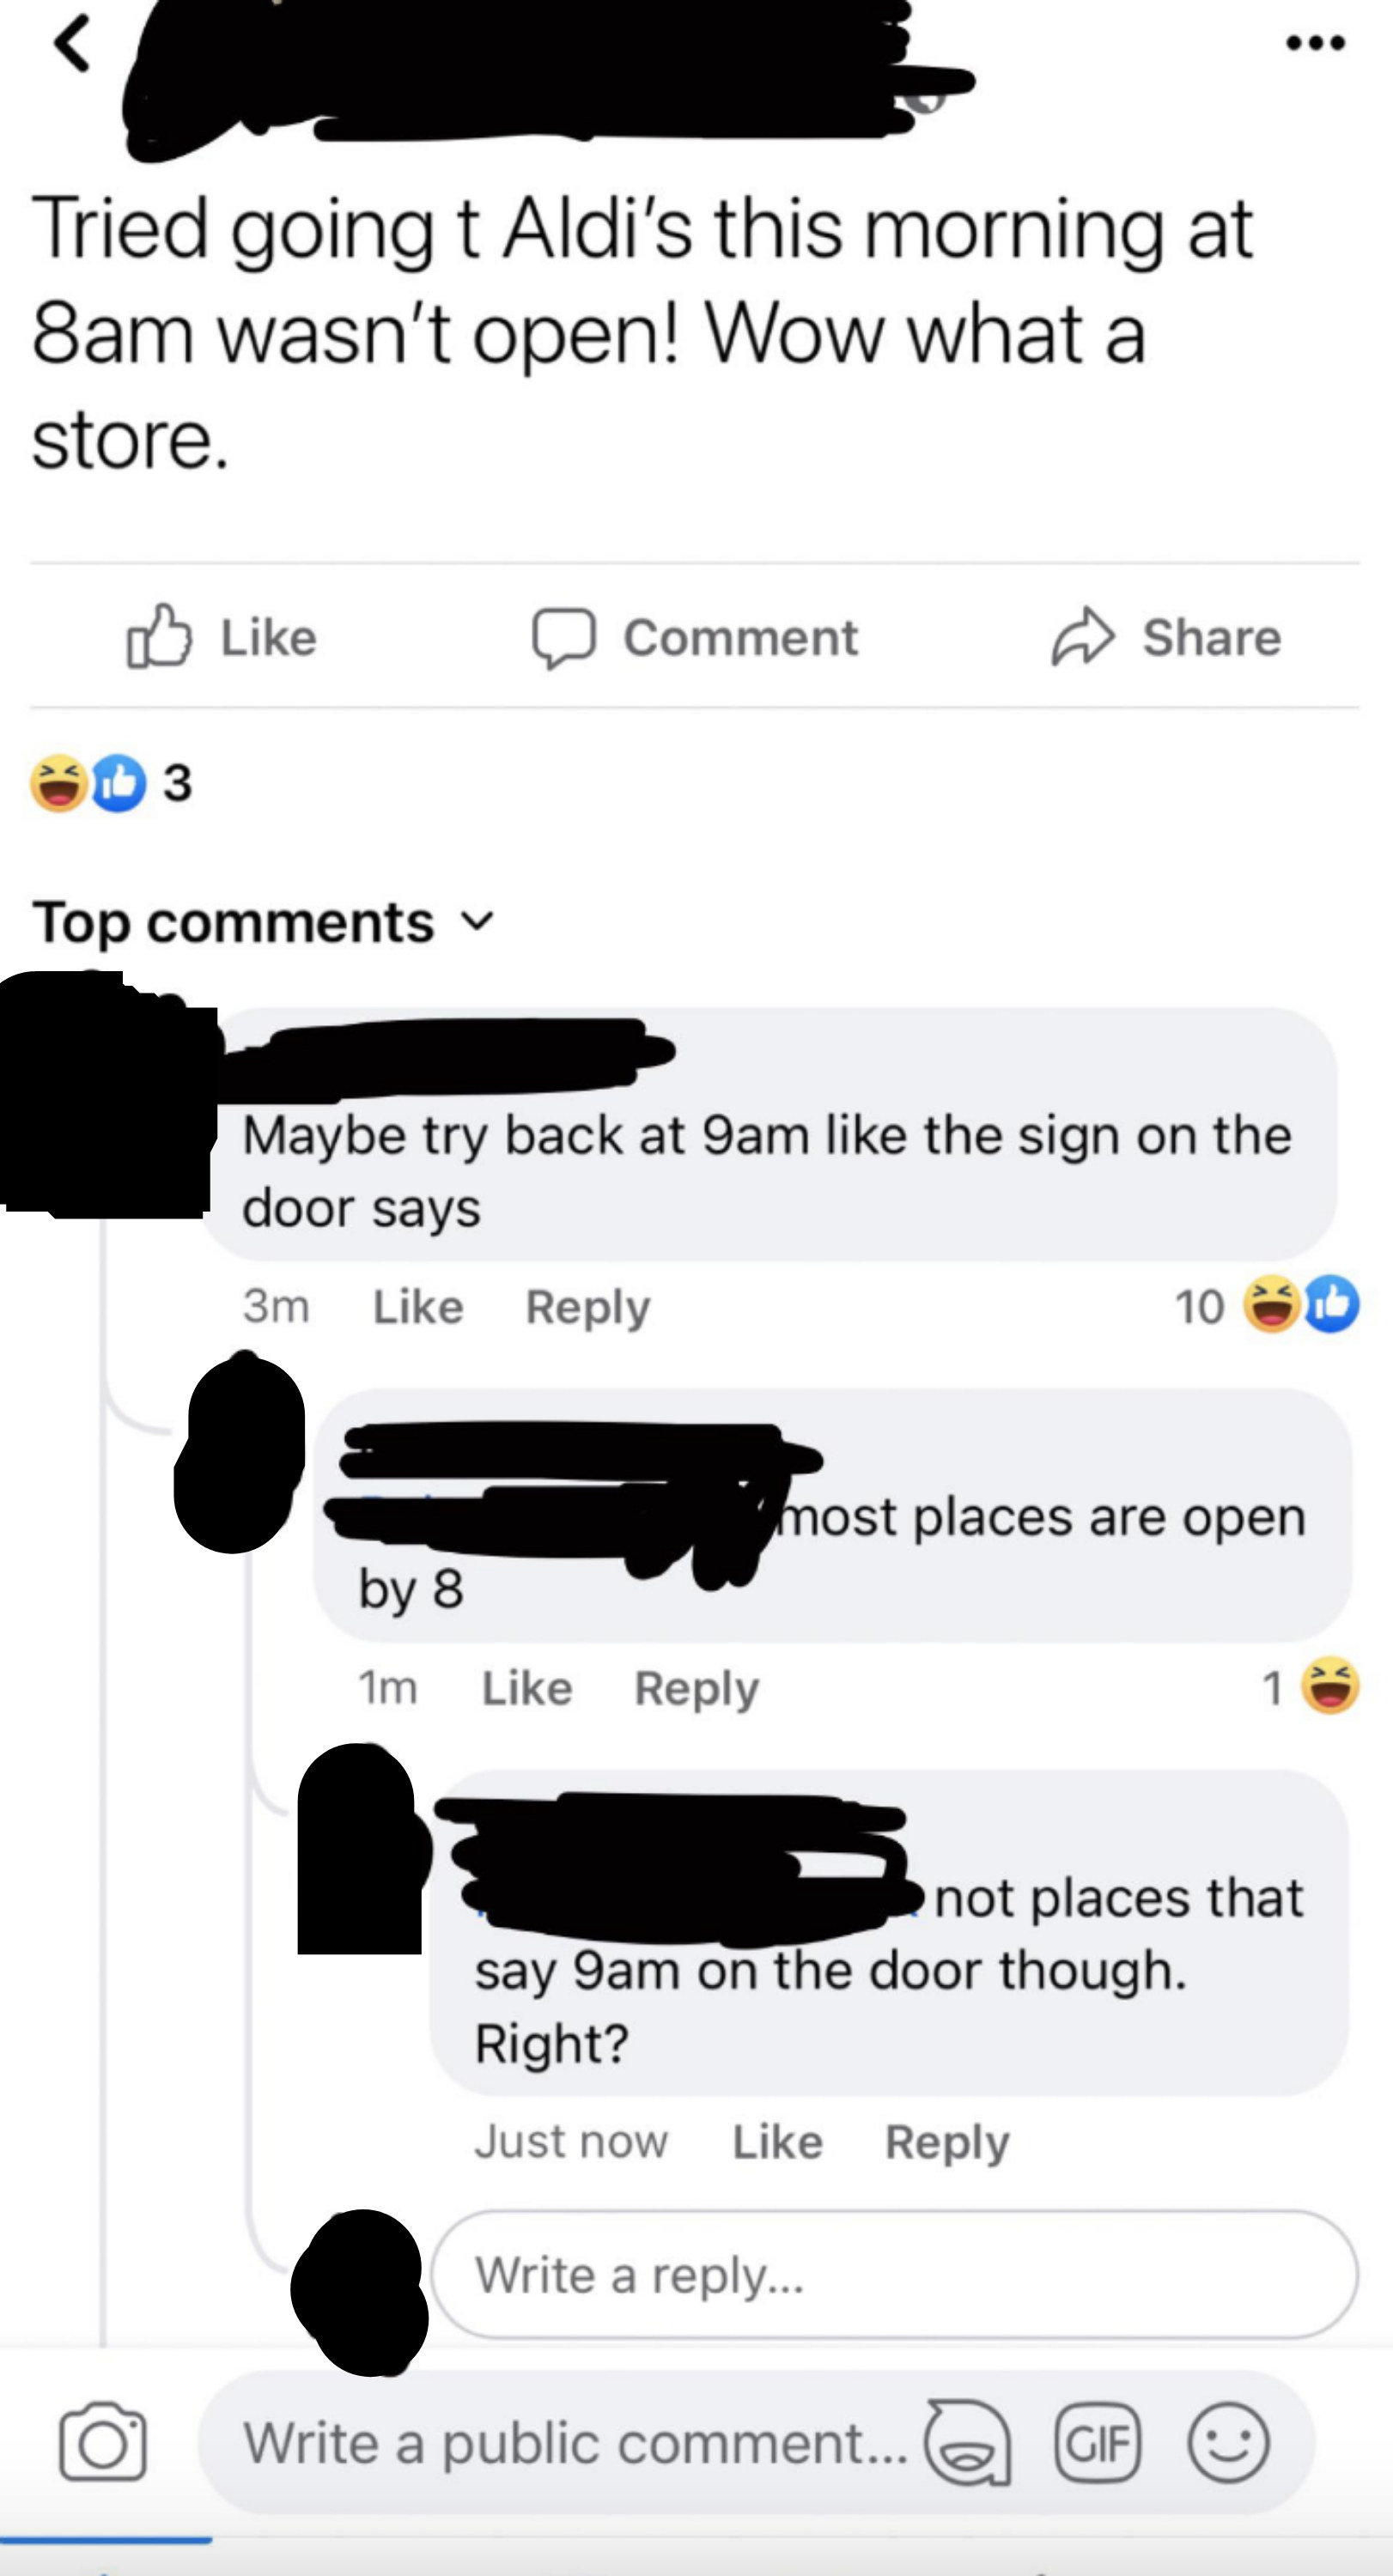 Person tried going to Aldi&#x27;s at 8am, it wasn&#x27;t open, says &quot;what a store&quot;; response: &quot;Maybe try back at 9, like the sign on the door says,&quot; and when person says &quot;Most stores are open at 8,&quot; response: &quot;Not places that say 9am on the door, though, right?&quot;